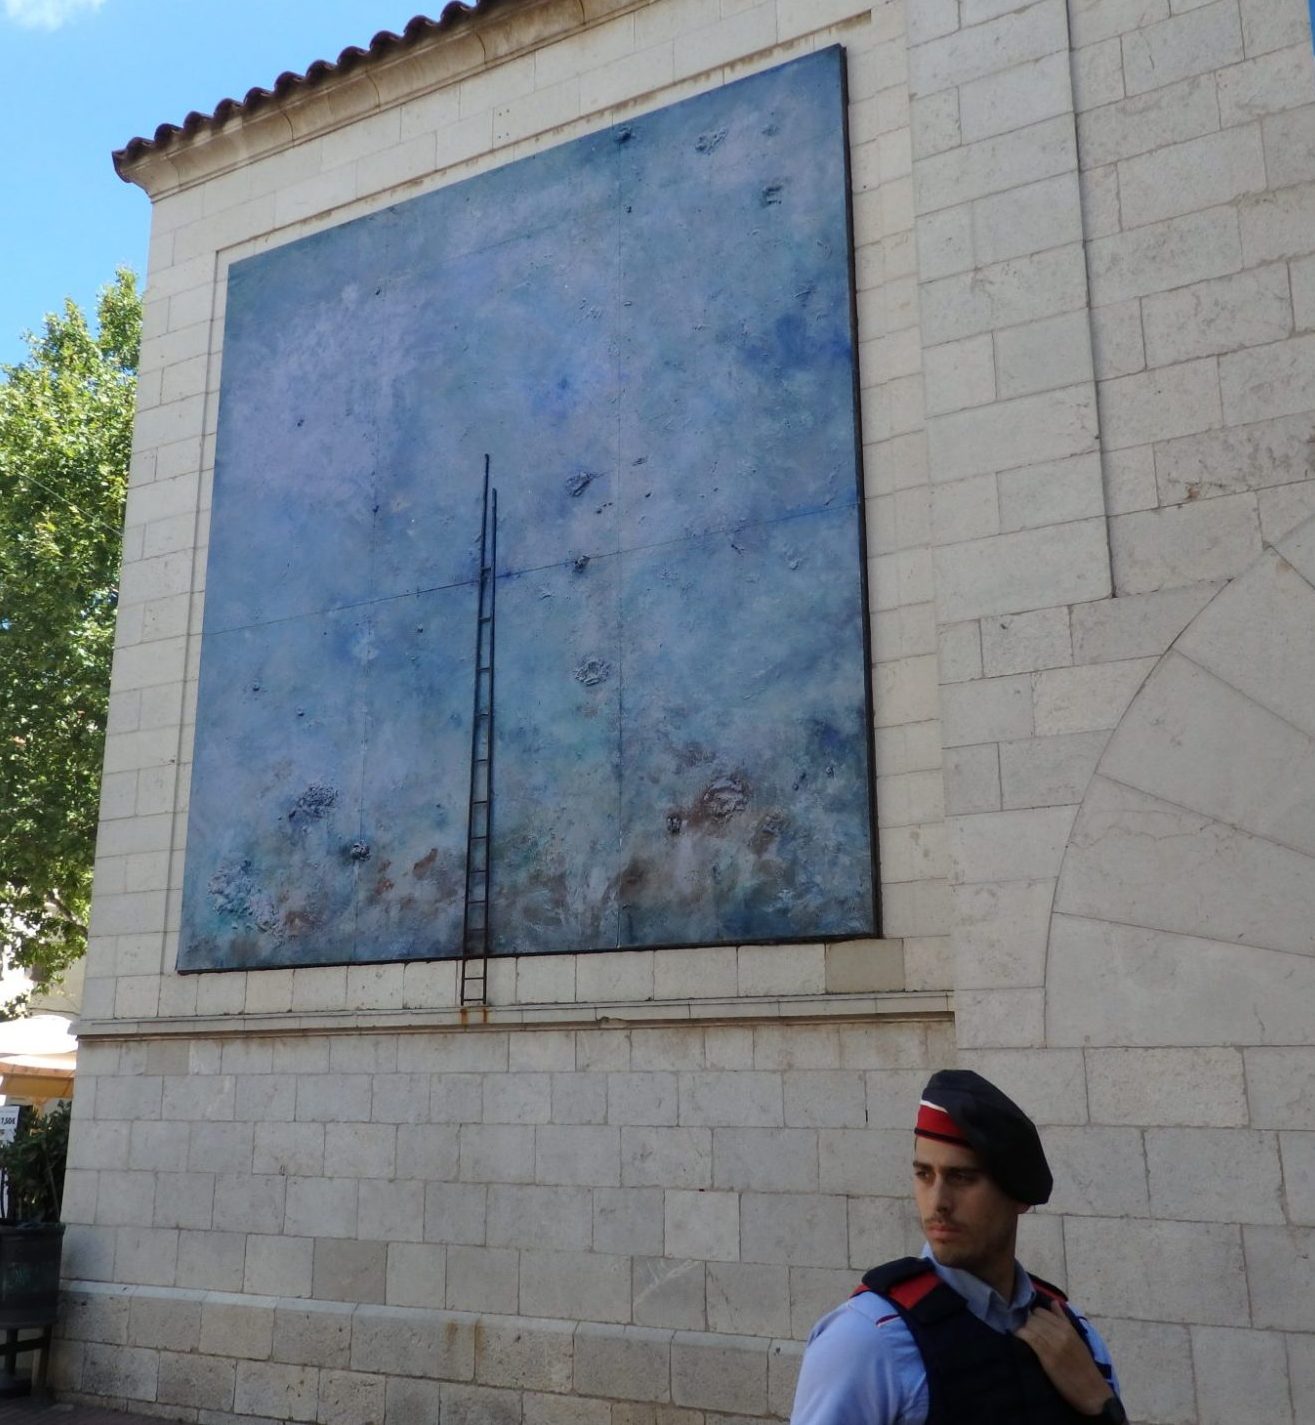 This artwork is just to the left of the tourist information office in Figueres, Spain.